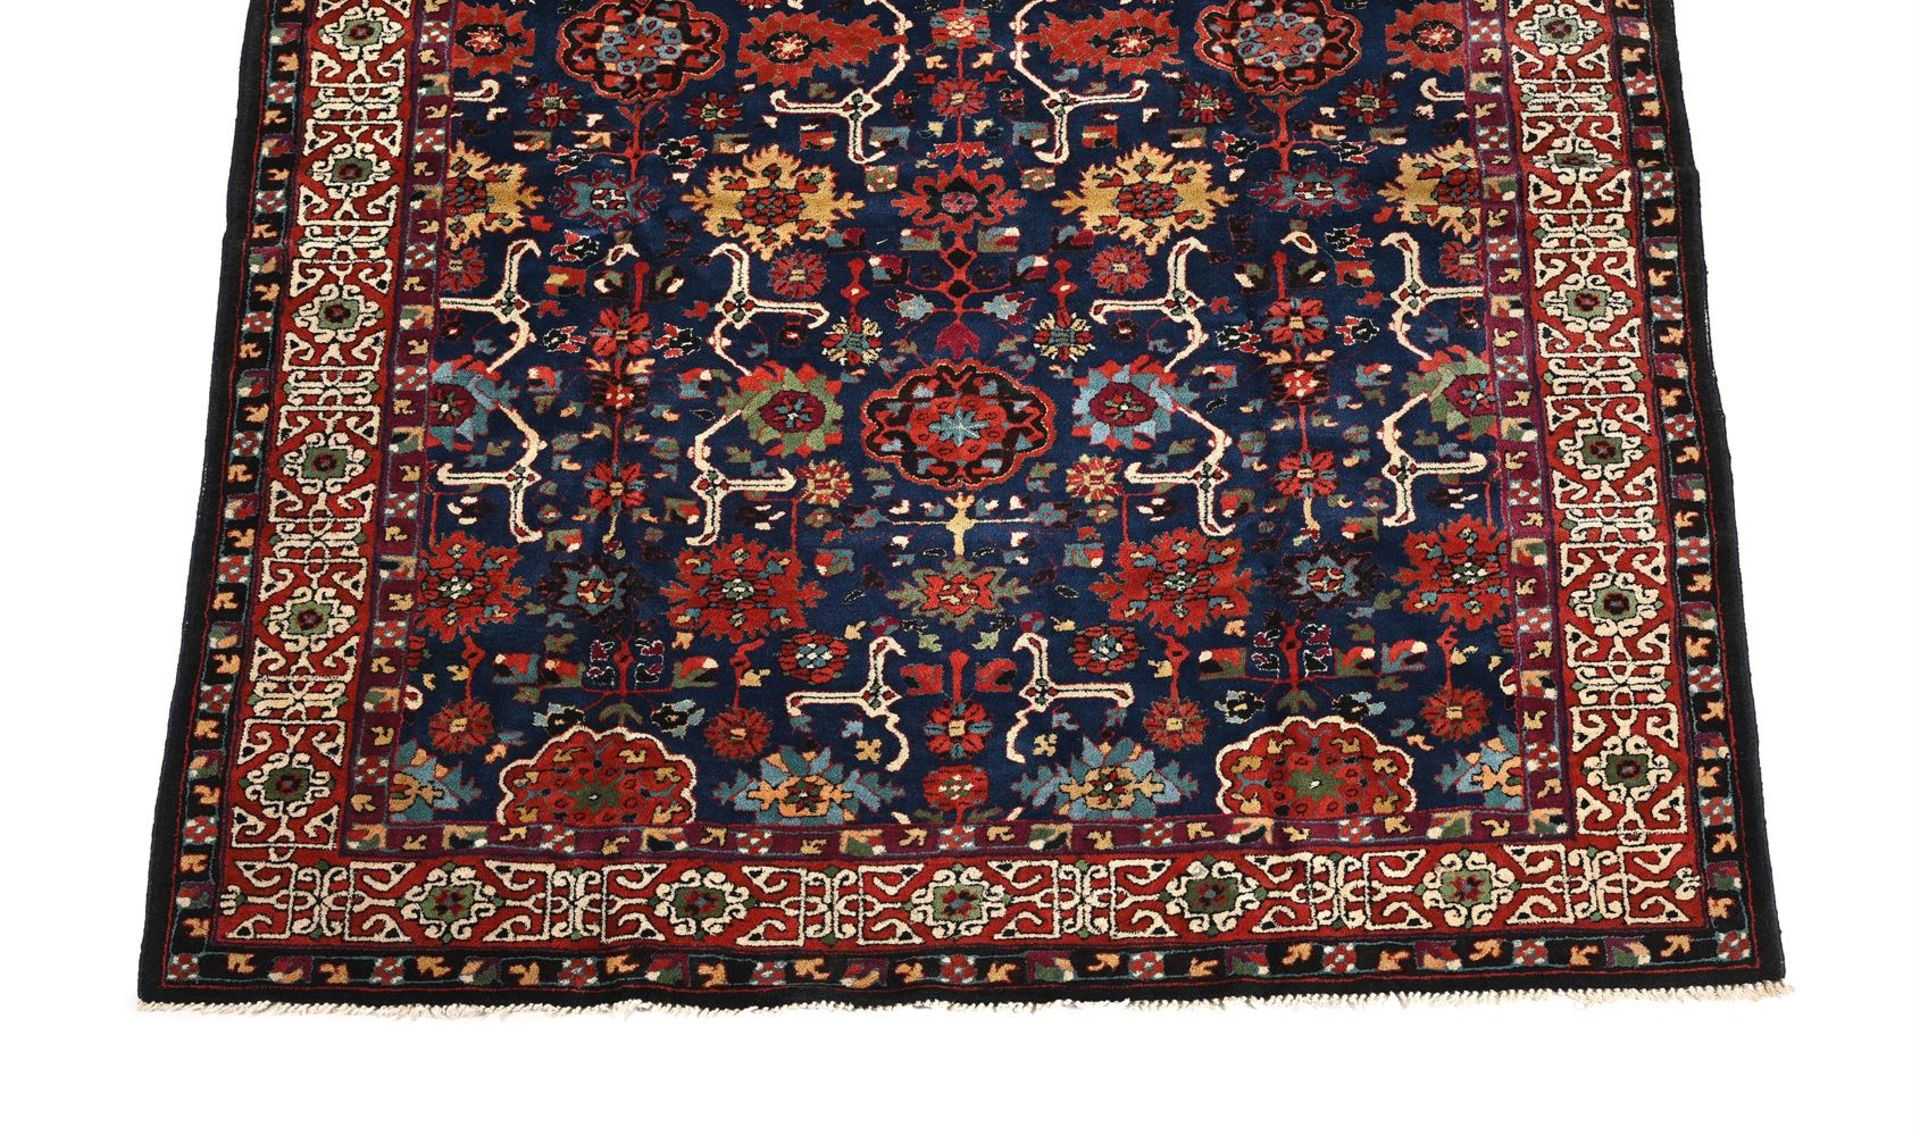 A TETEX CARPET, approximately 317 x 204cm - Image 2 of 3